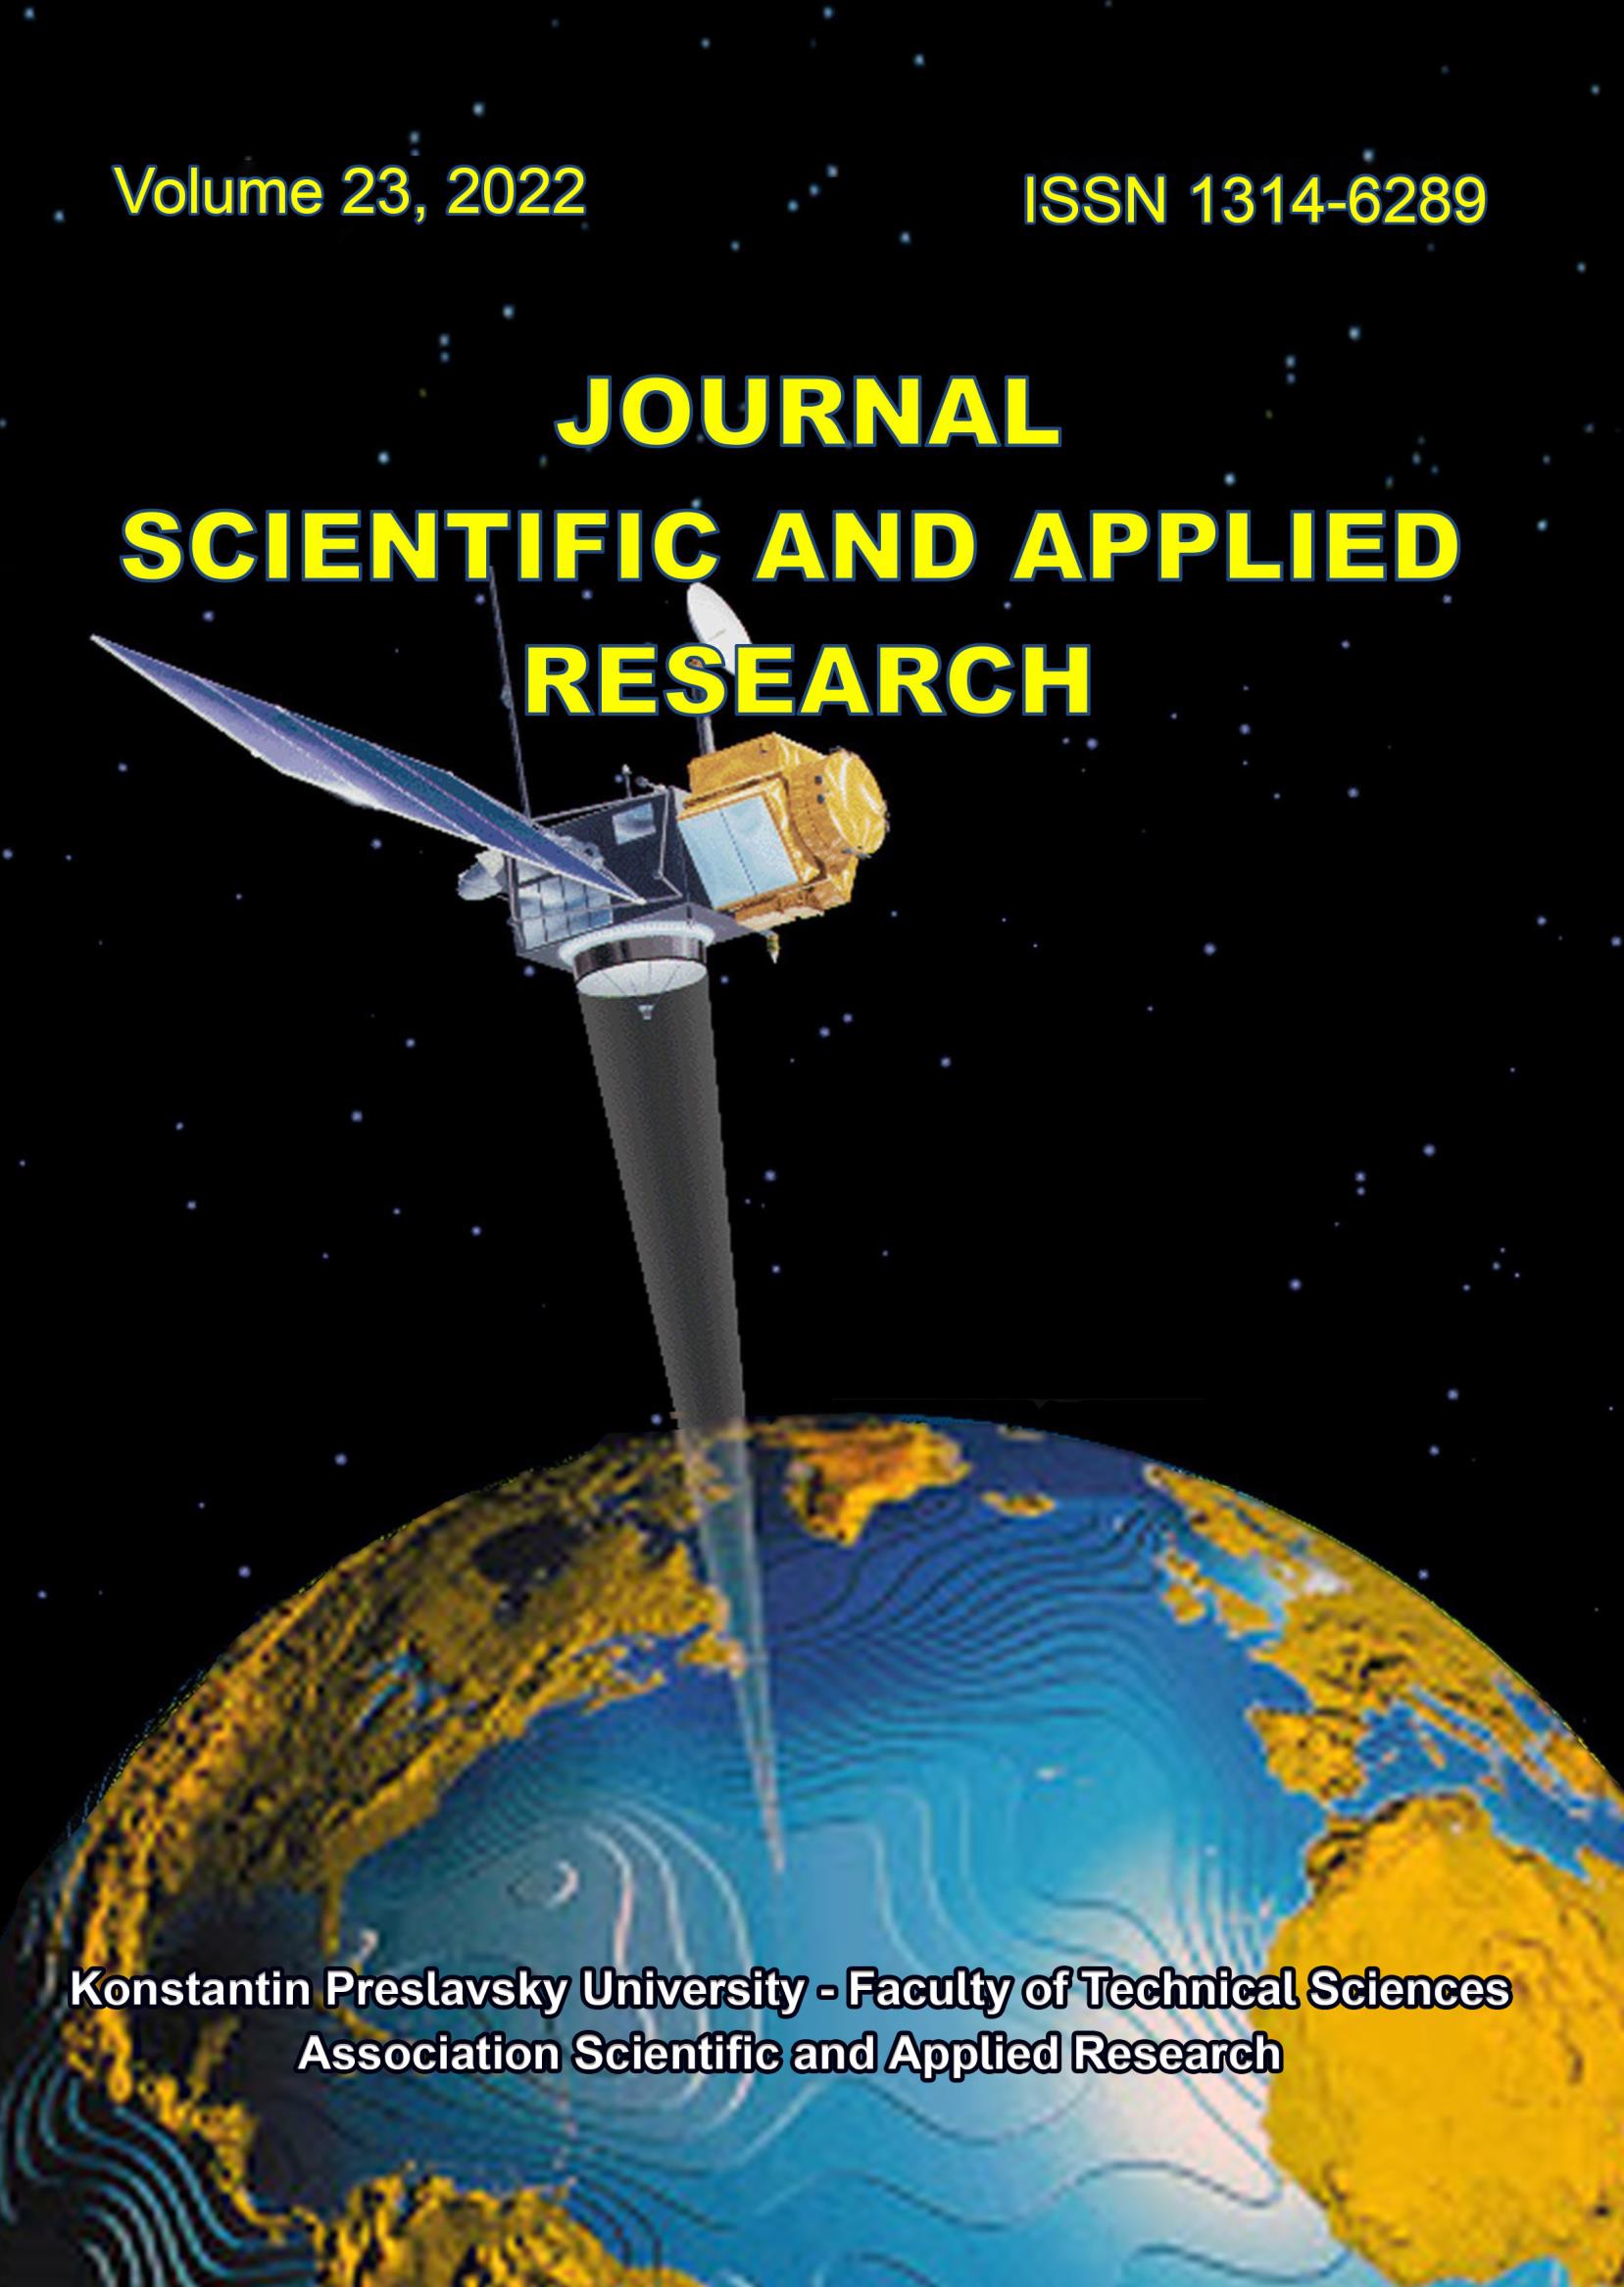 					View Vol. 23 No. 1 (2022): Journal Scientific and Applied Research
				